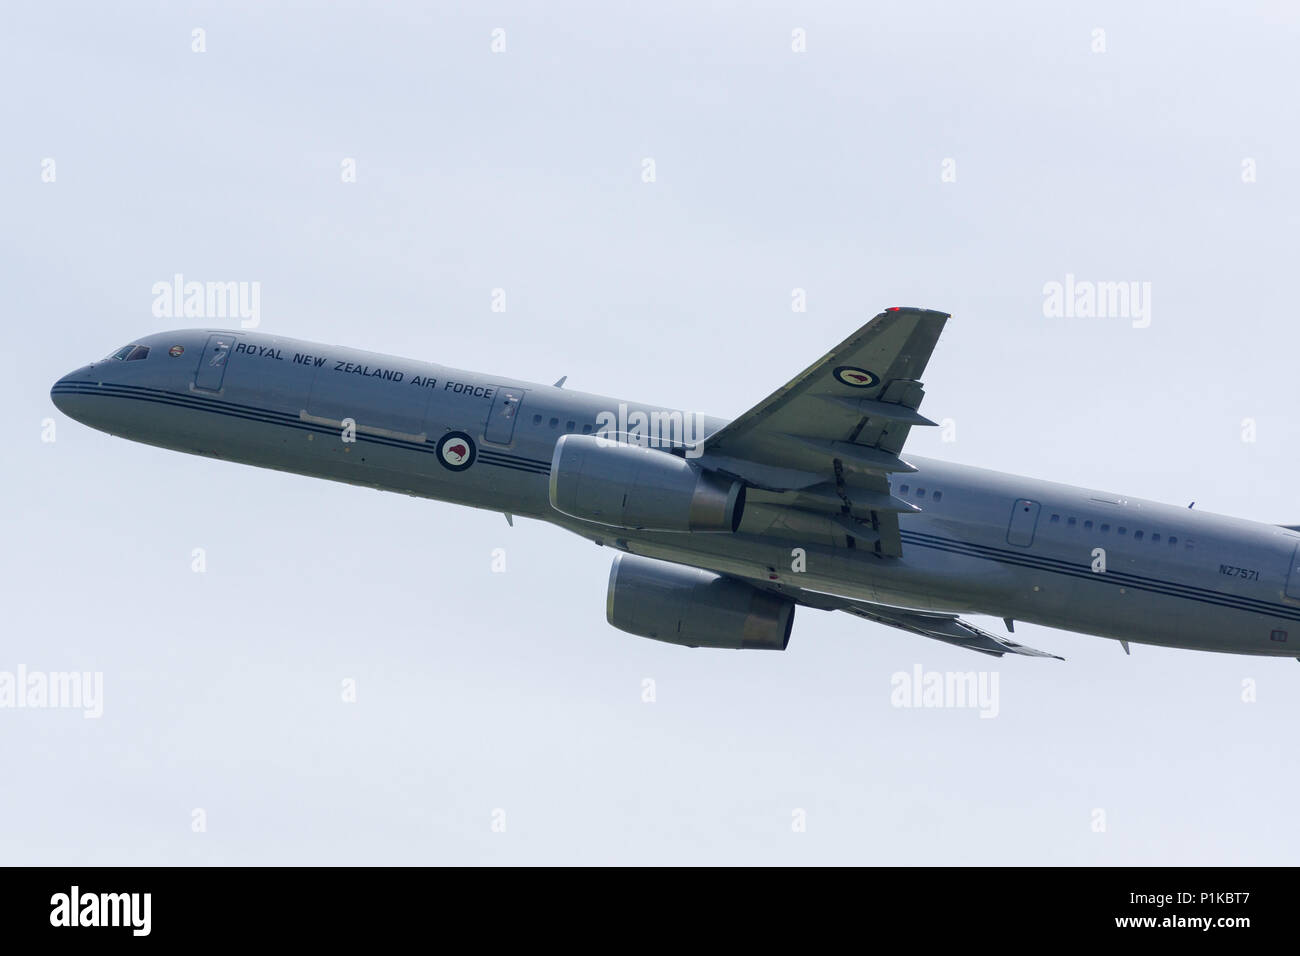 Boeing 757-2K2 military transport aircraft of 40 Squadron Royal New Zealand Air Force Stock Photo